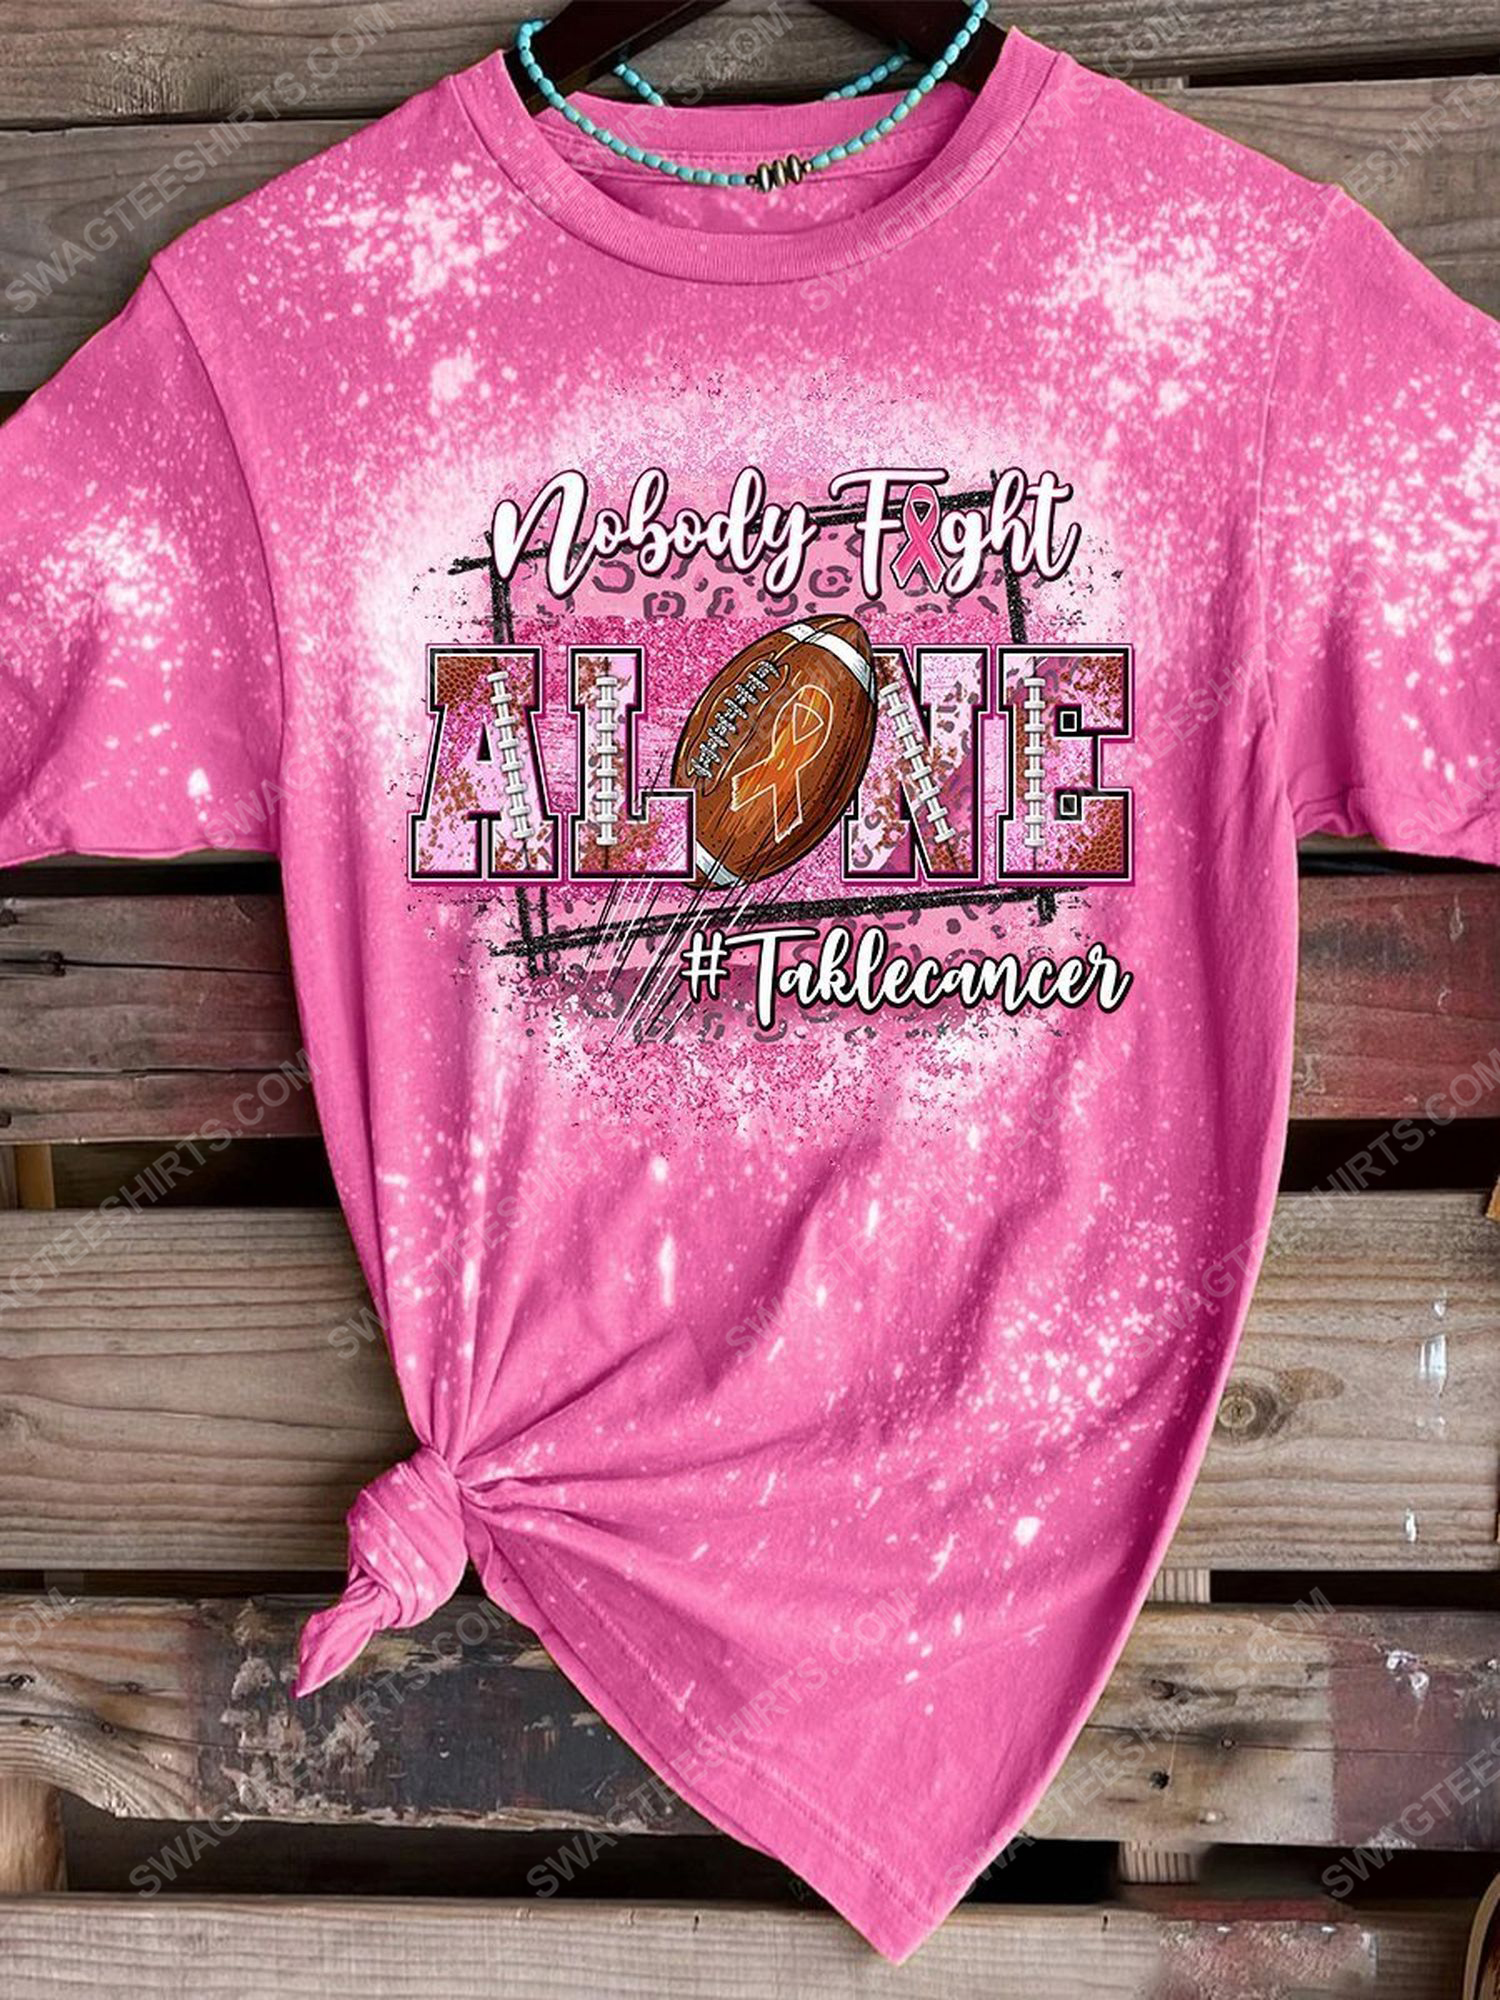 Breast cancer nobody fights alone bleached shirt 1 - Copy